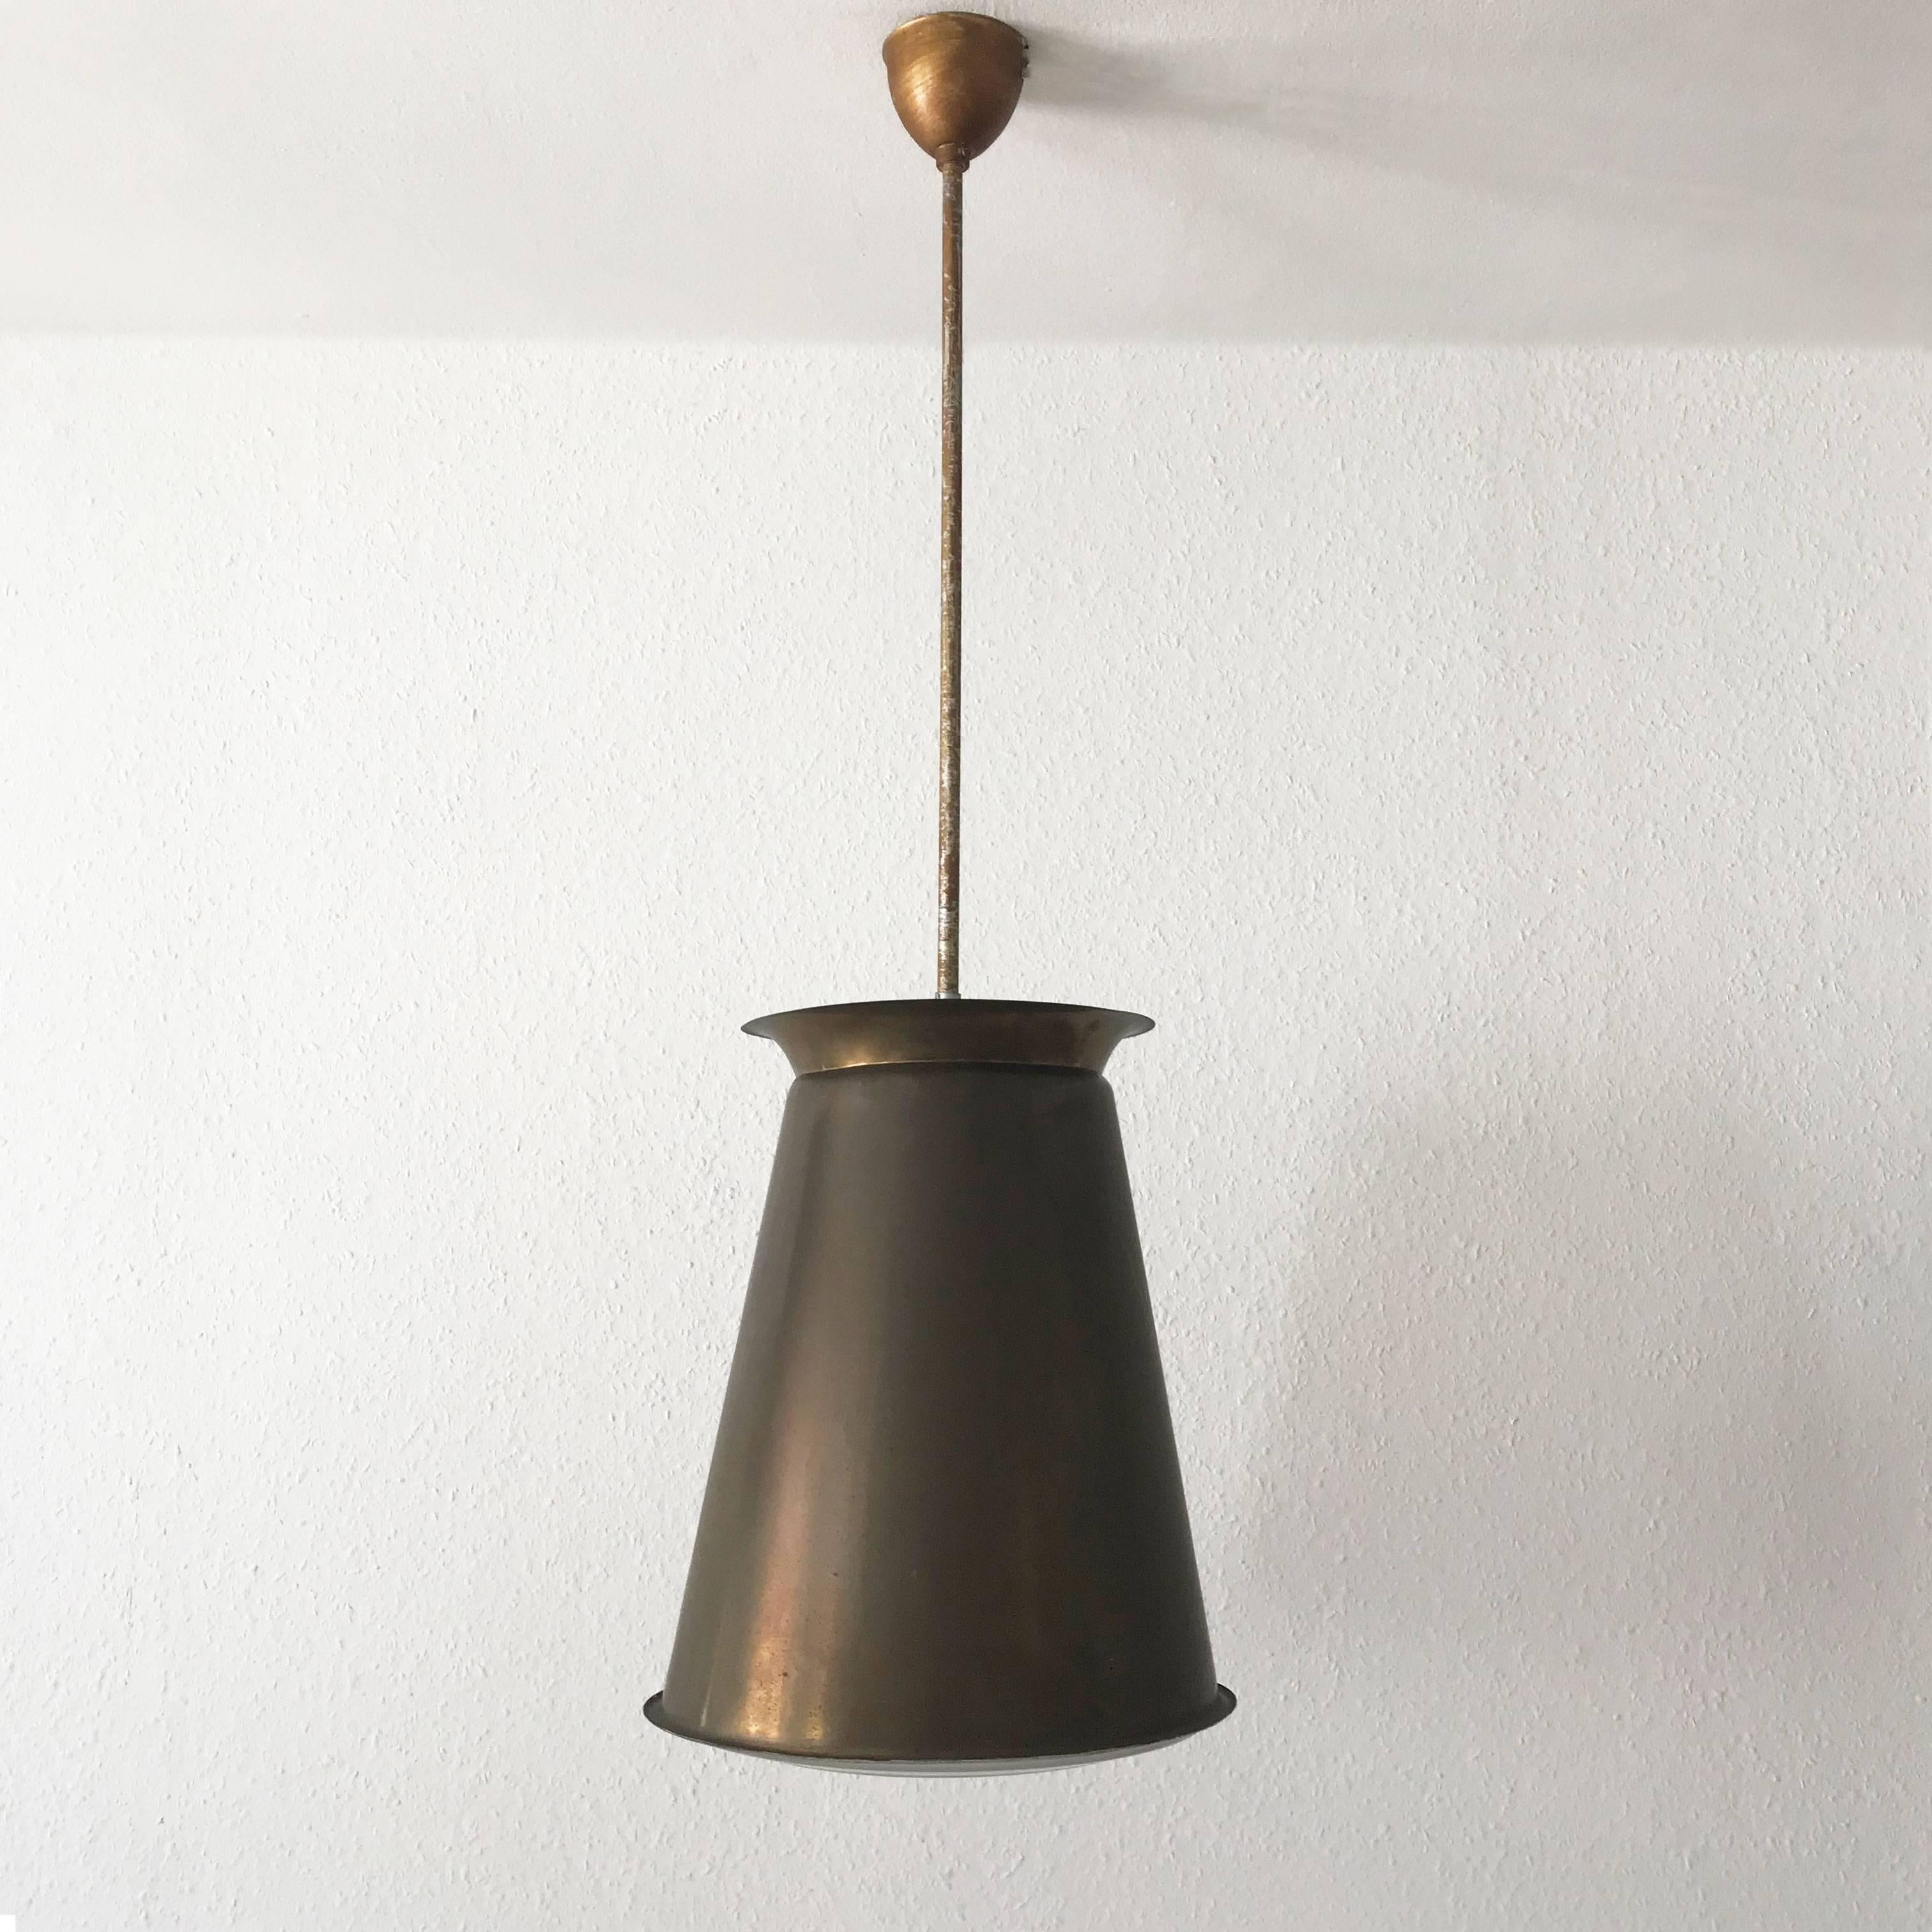 Cast Exceptional Bauhaus Pendant Lamp by Adolf Meyer for Zeiss Ikon, 1930s, Germany For Sale